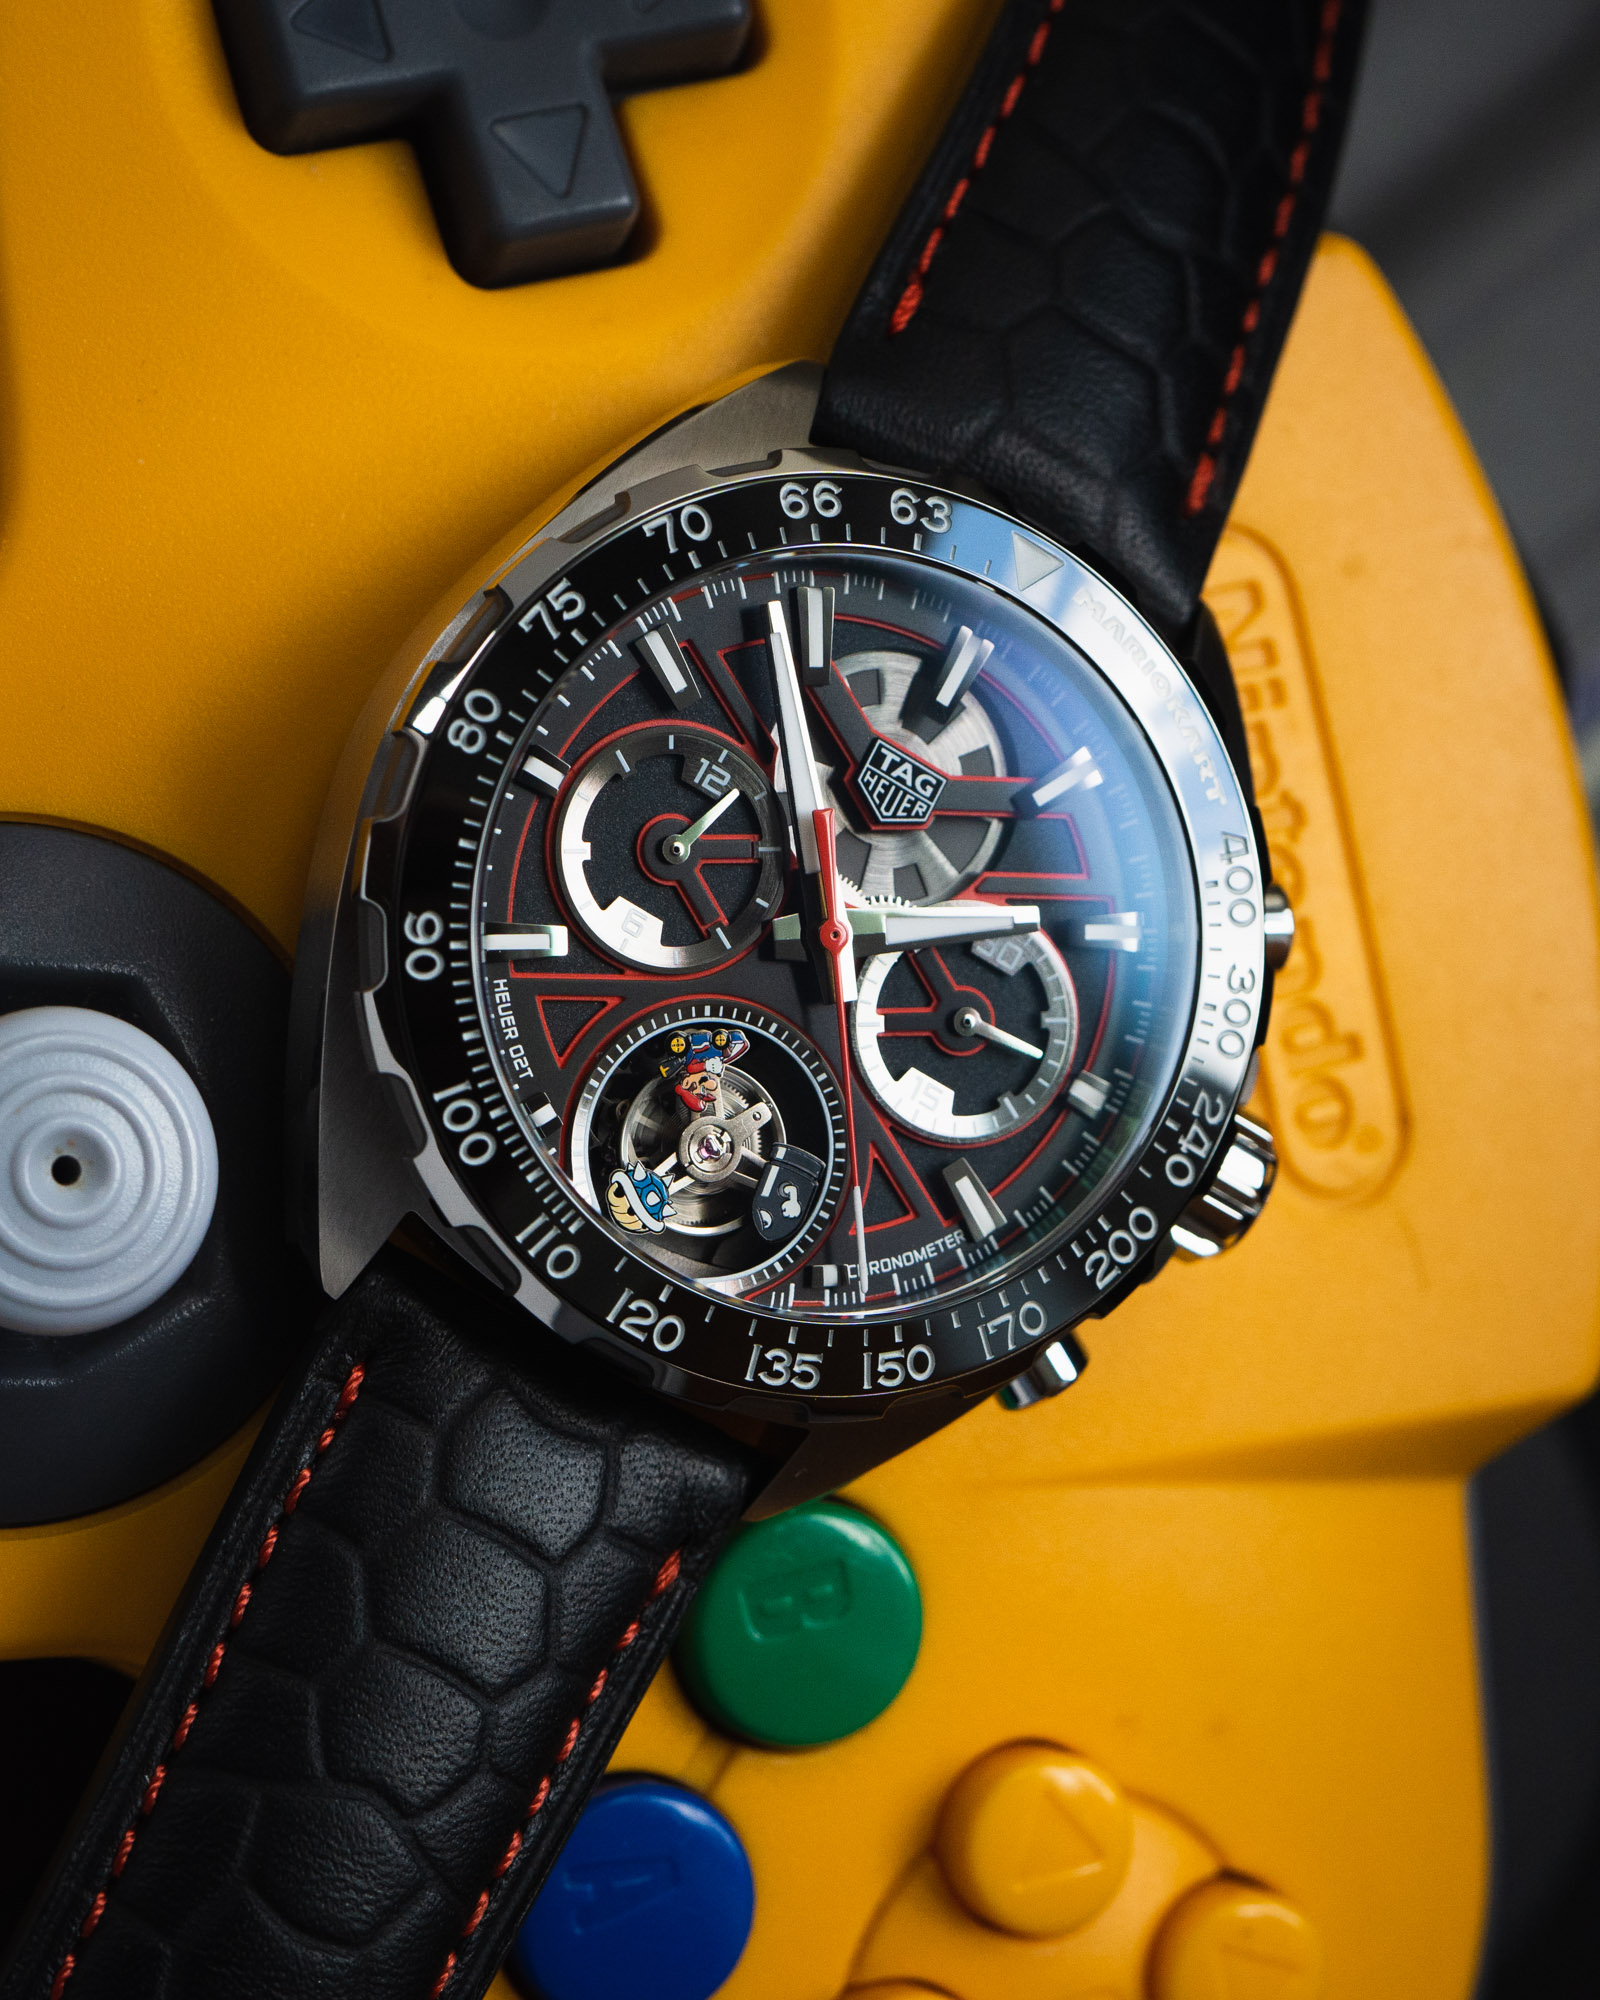 Interview With Jean-Claude Biver On TAG Heuer Watch 9.3% Average